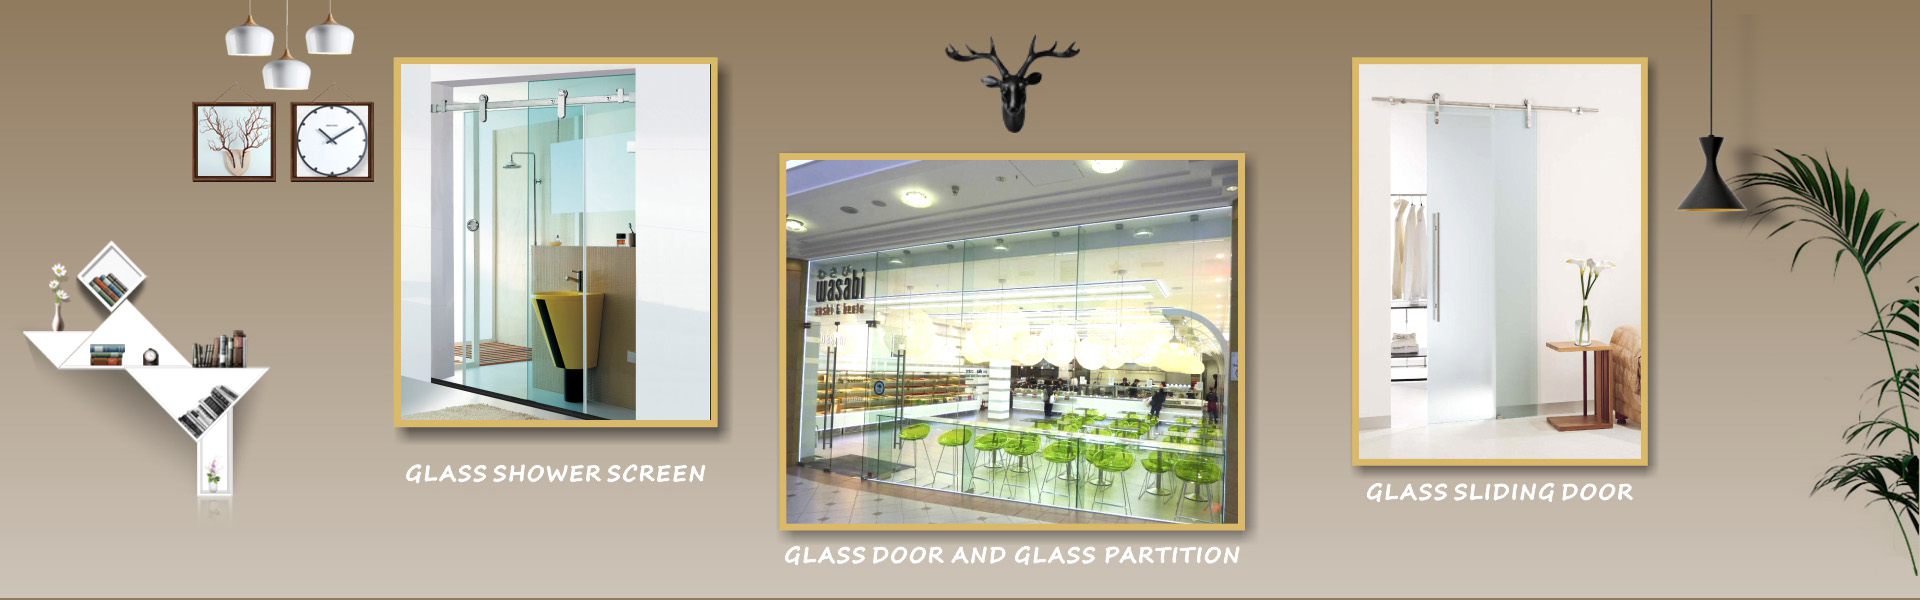 GLASS DOOR AND GLASS PARTITION